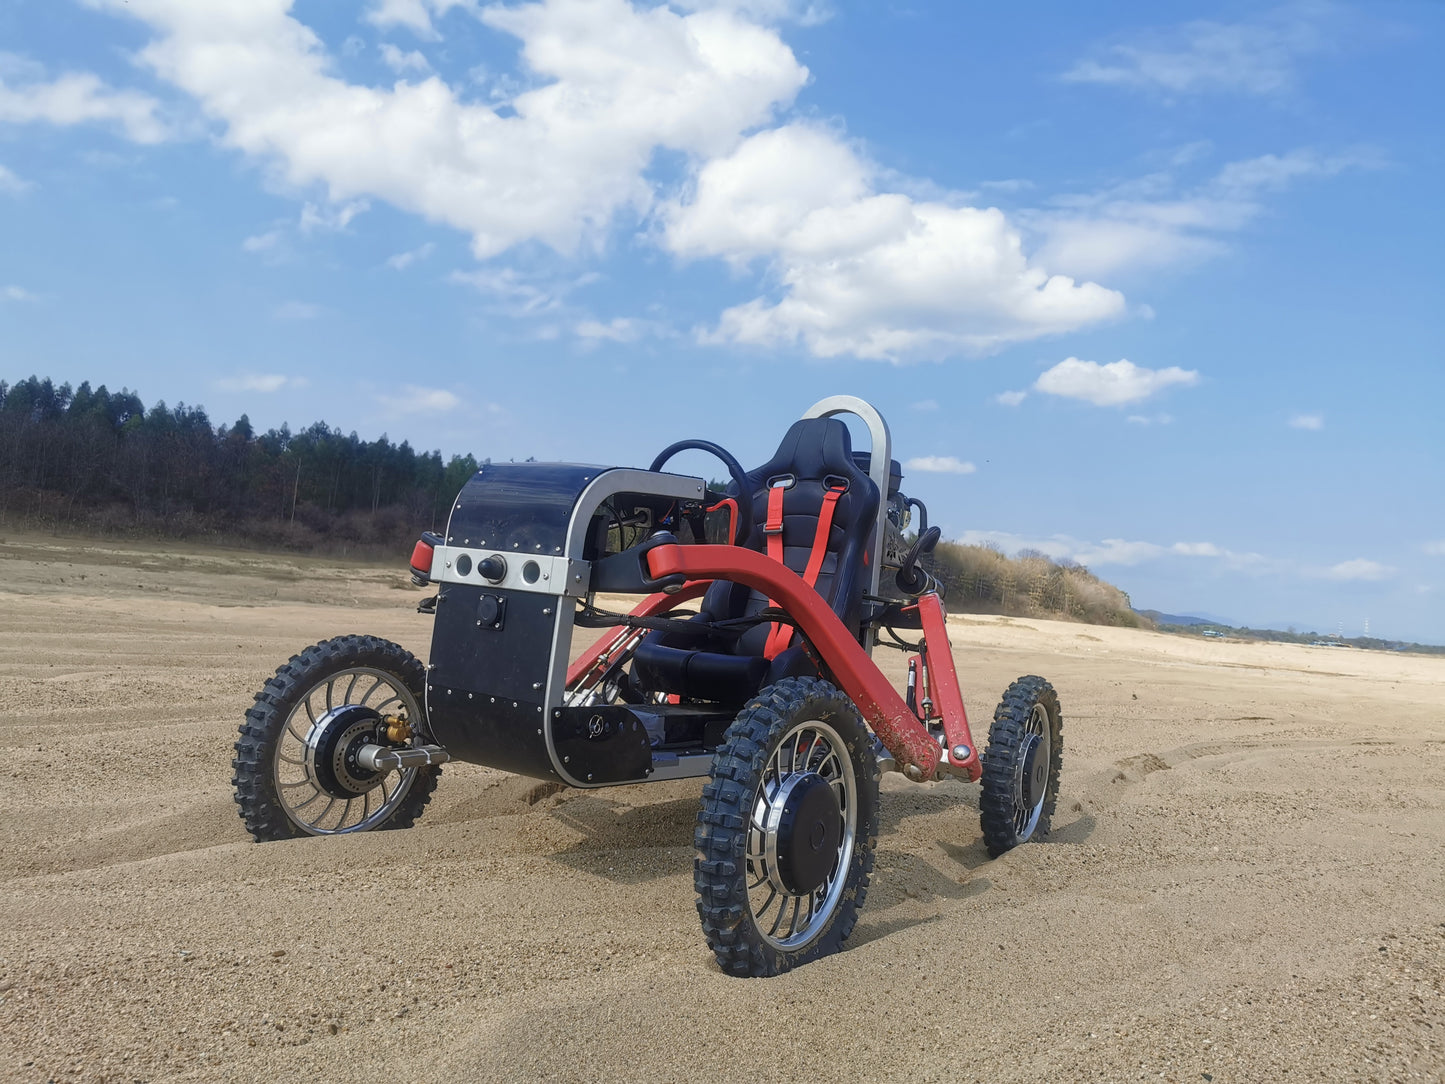 All-terrain electric off-road vehicle